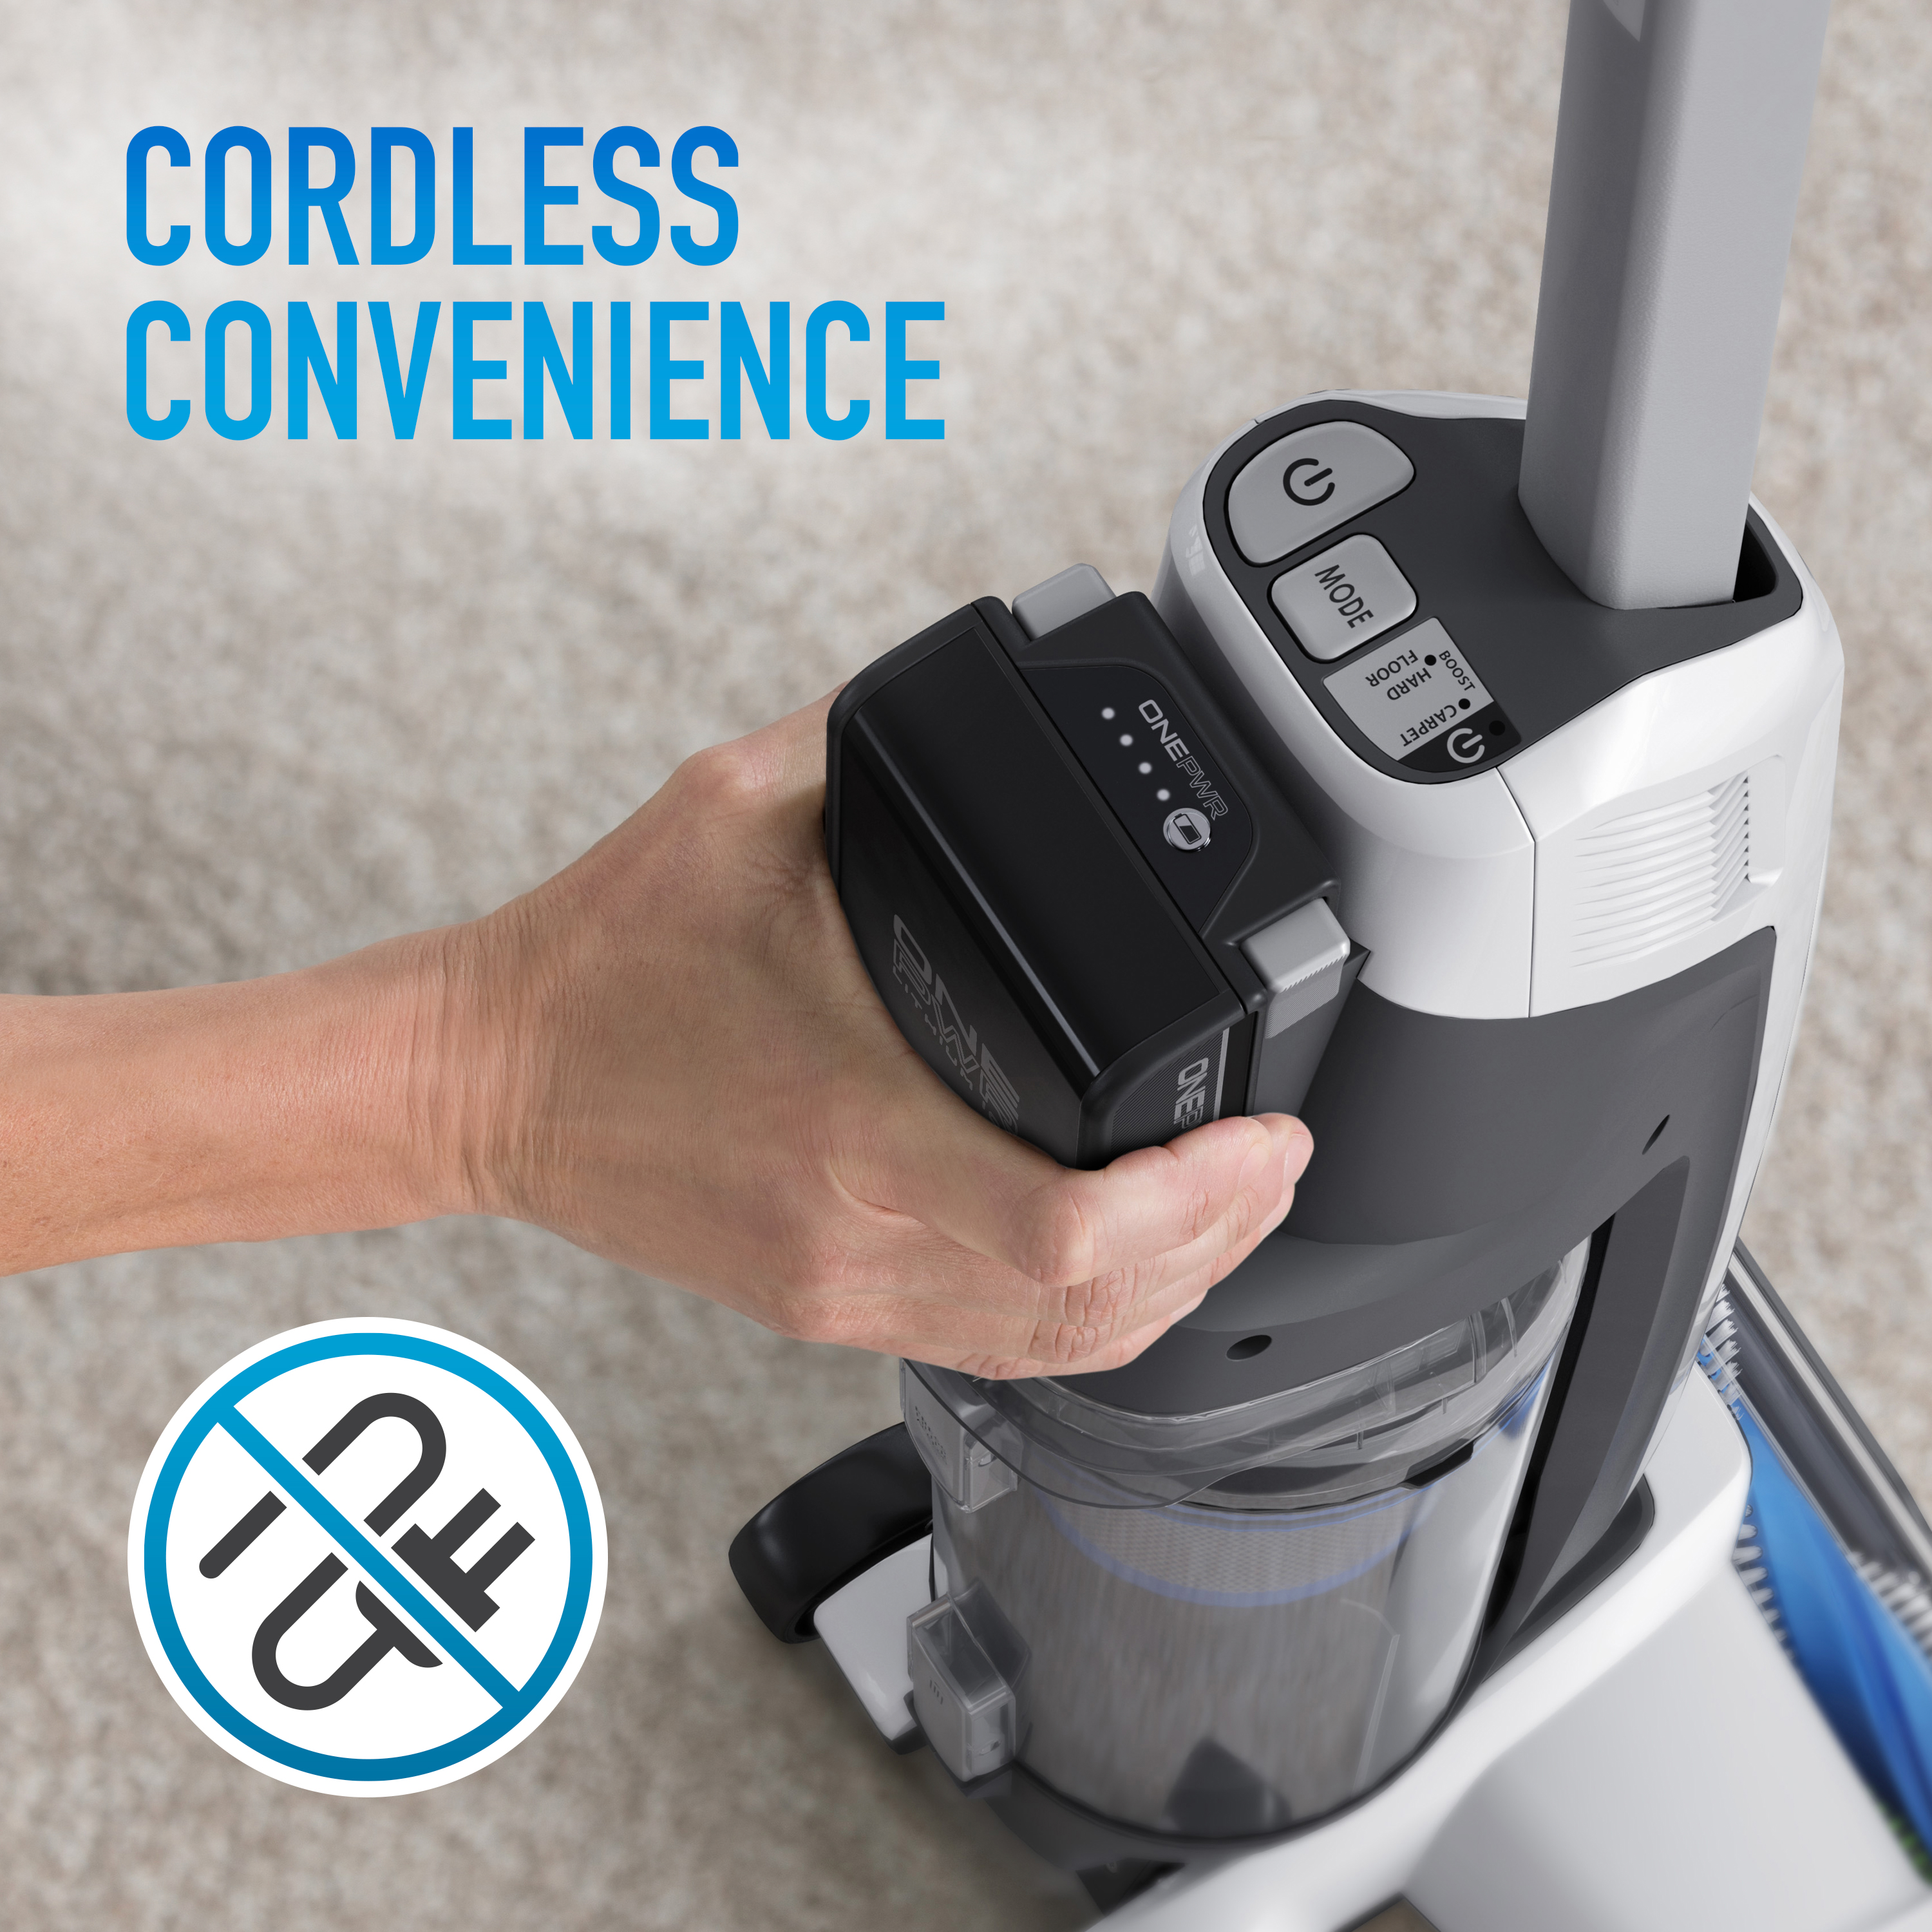 Hoover ONEPWR Evolve Pet Cordless Upright Vacuum Cleaner - Kit BH53420PC - image 4 of 8